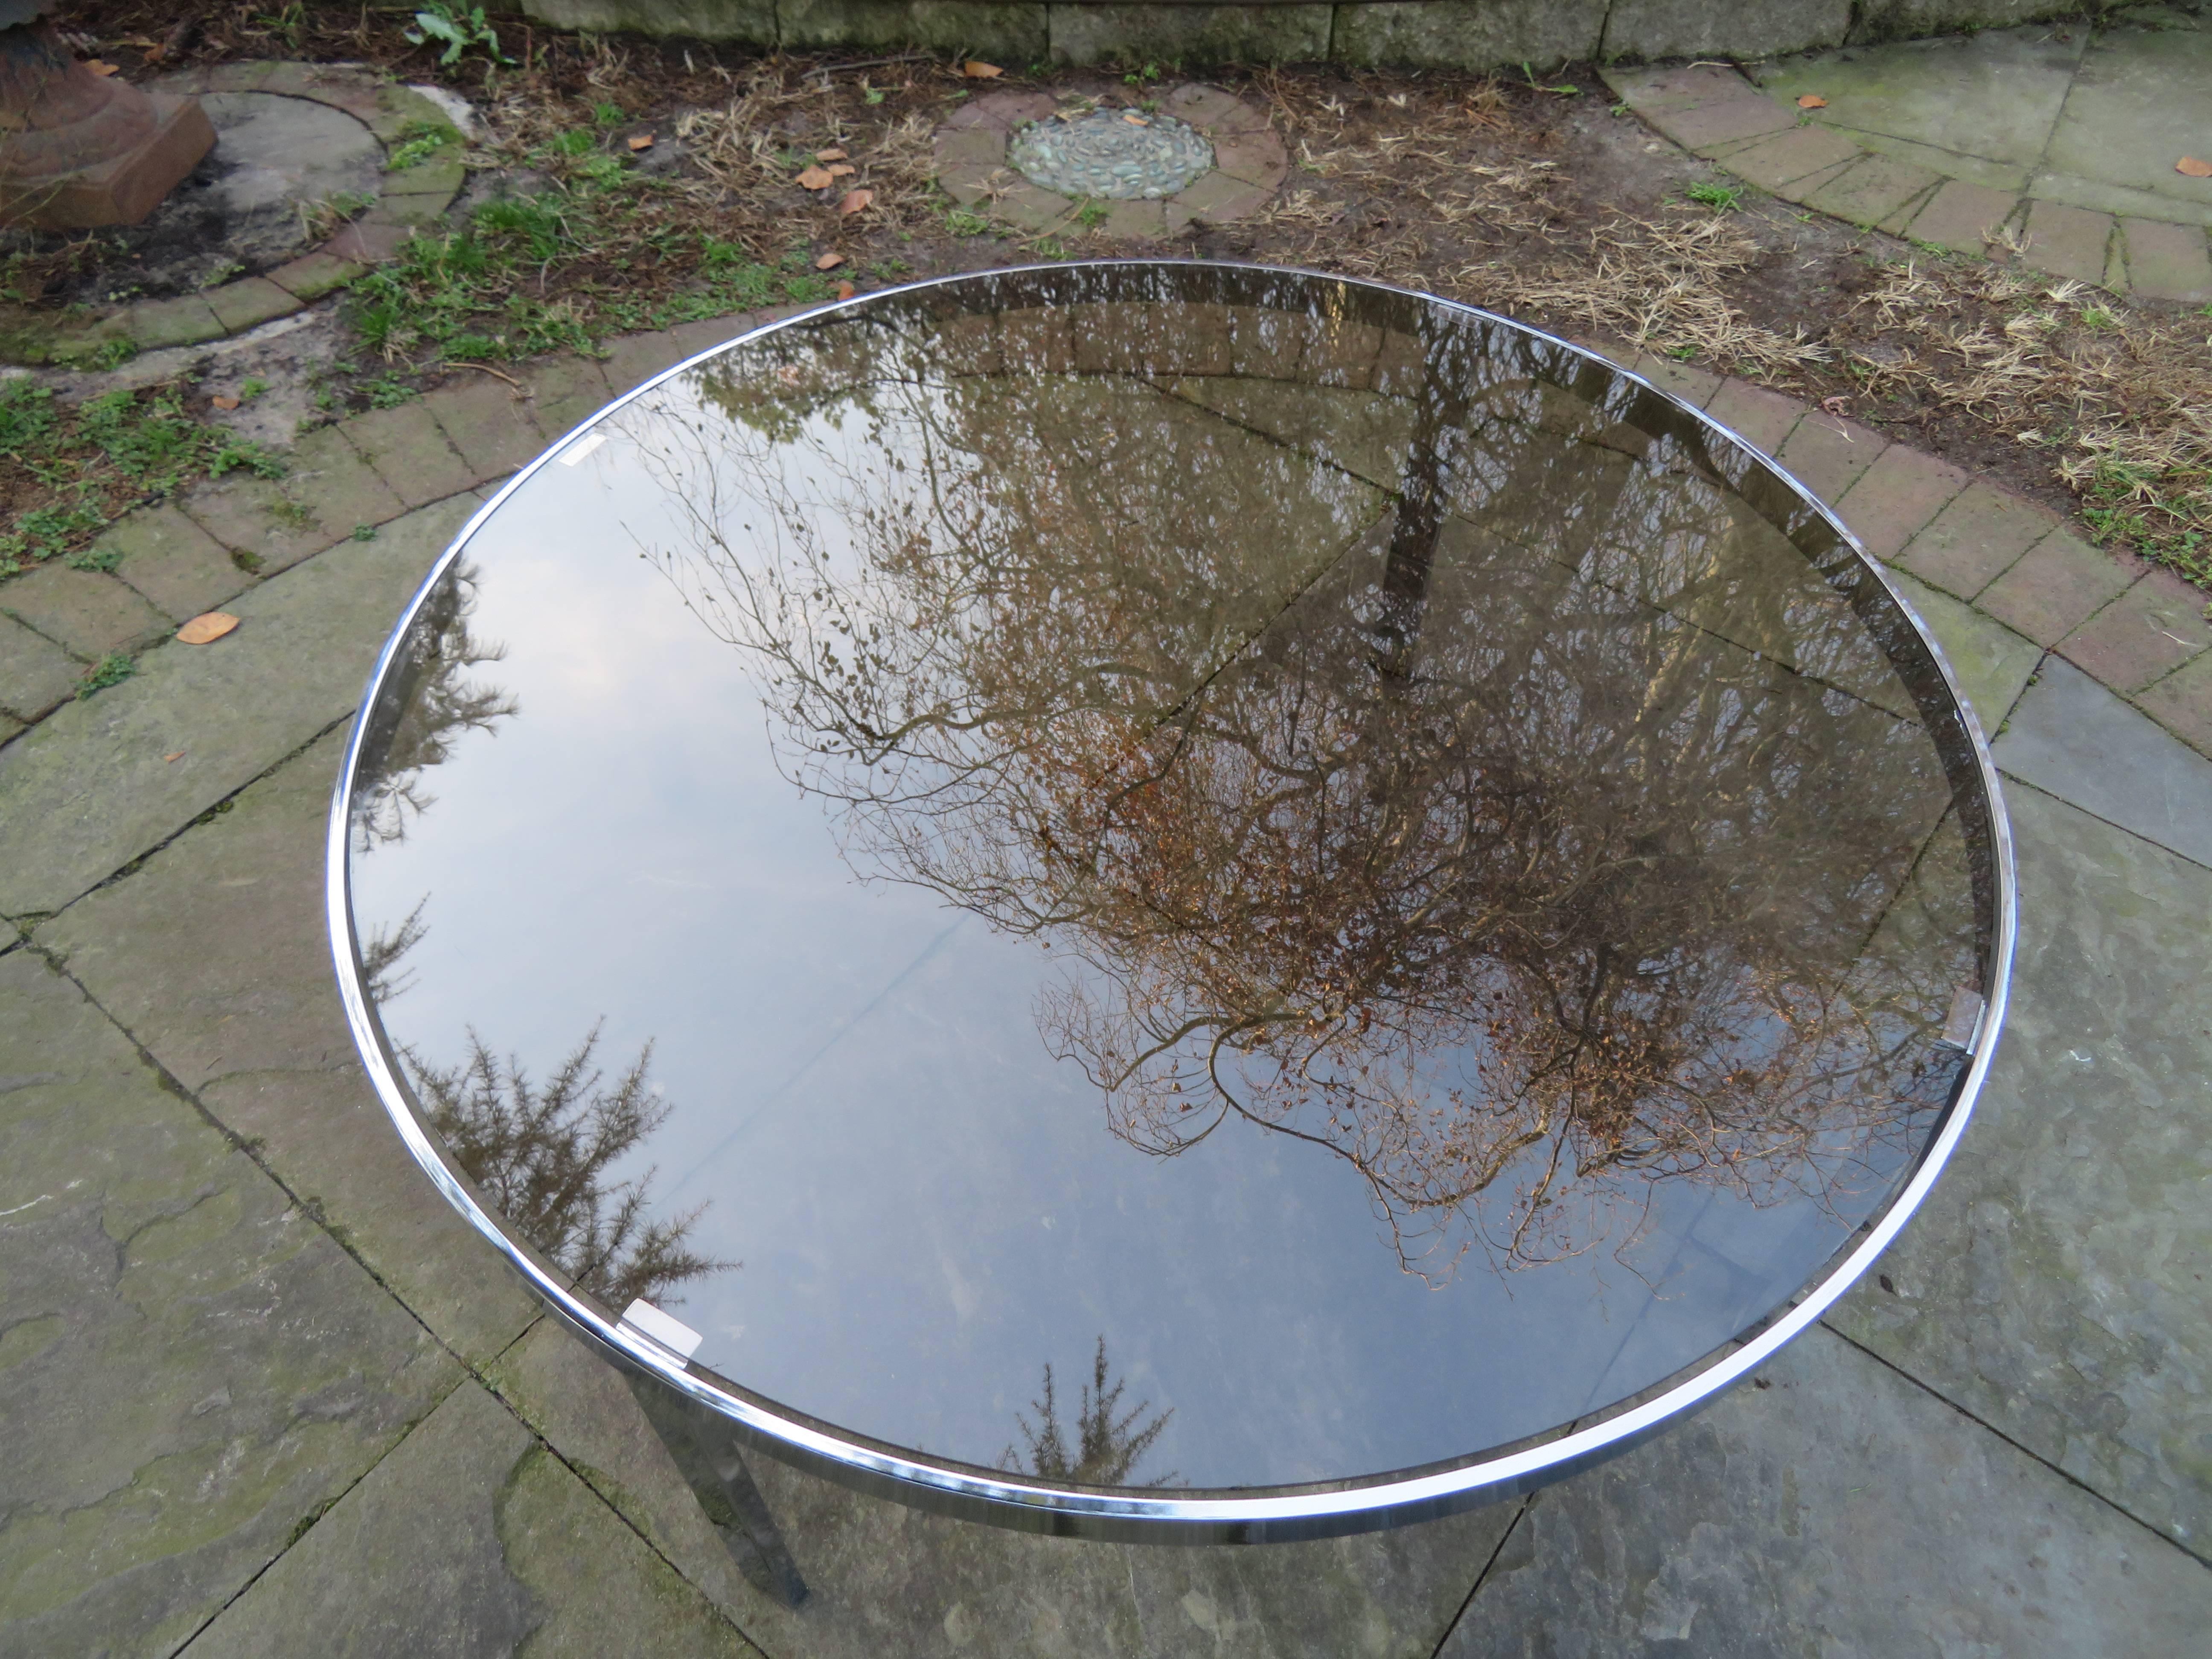 Sexy Milo Baughman round chrome coffee table with smoked glass. Chrome base is in very nice vintage condition with a polished mirror finish.